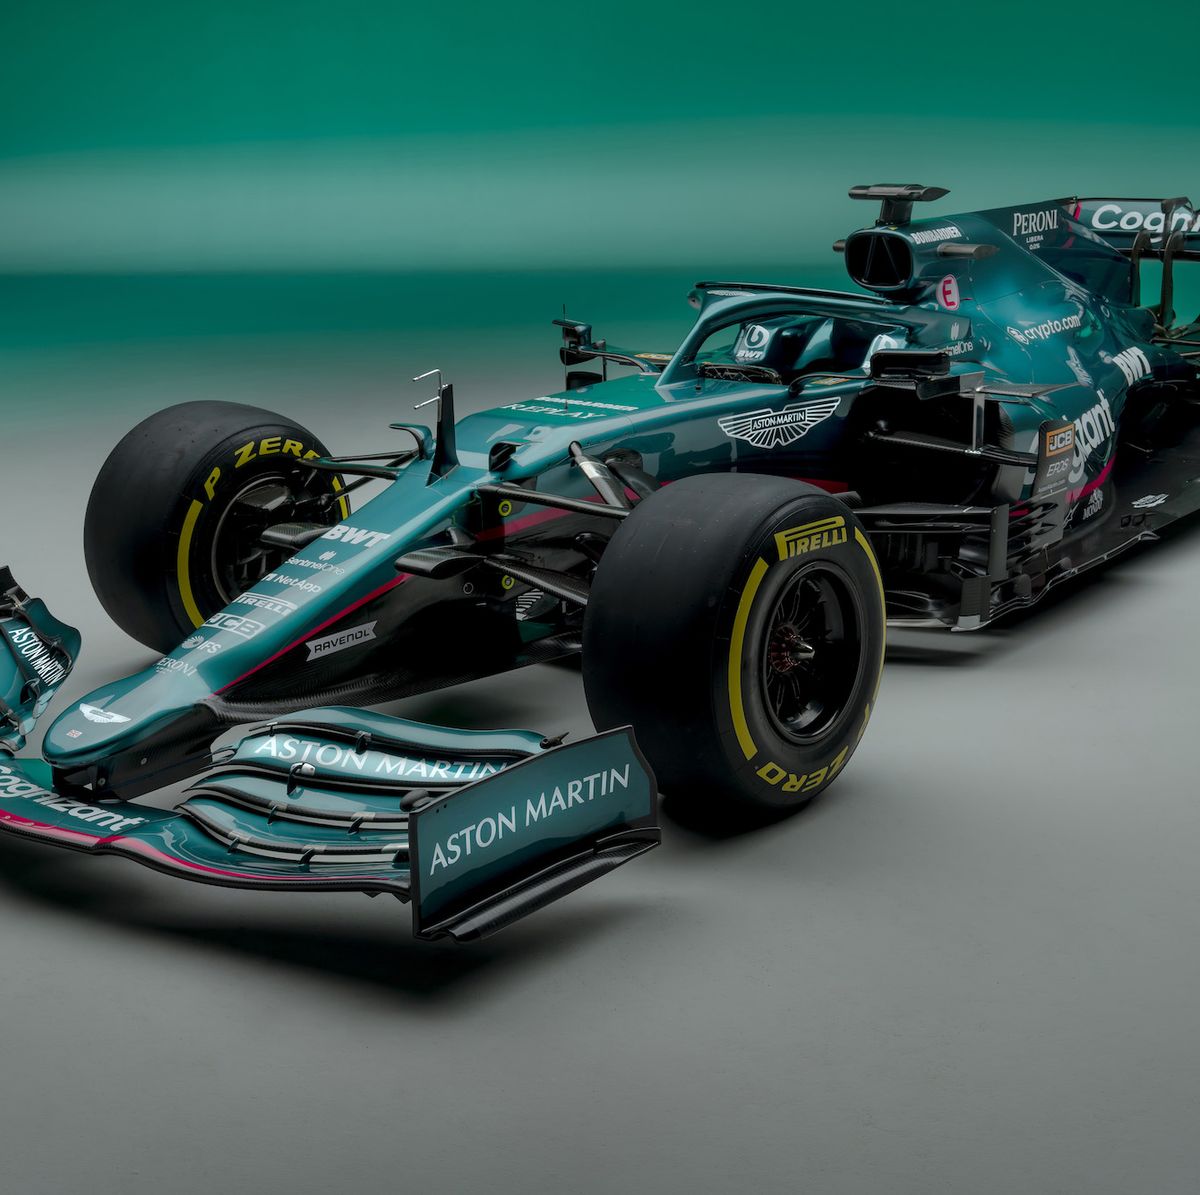 Mercedes unveils its new Formula One car for 2021